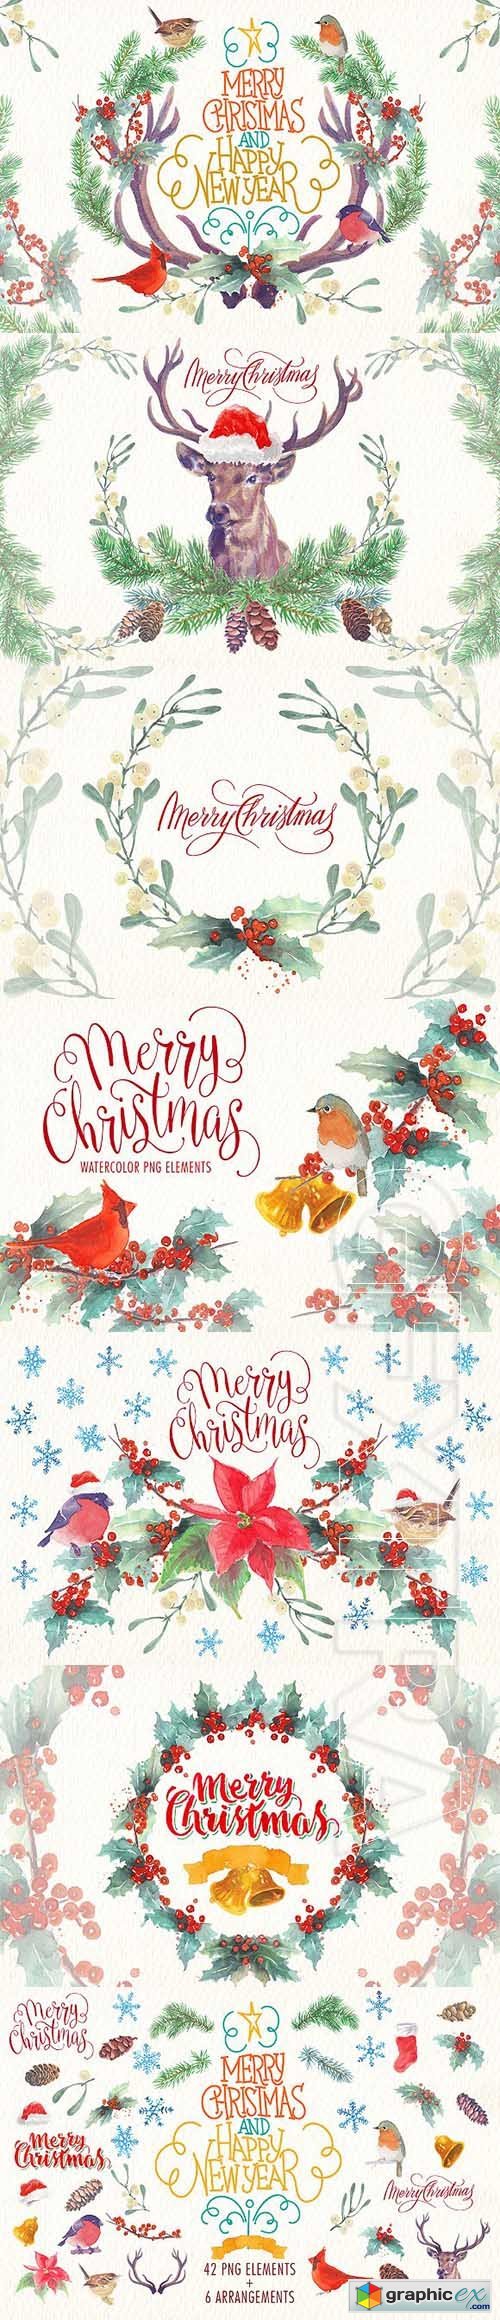 Watercolor christmas png elements